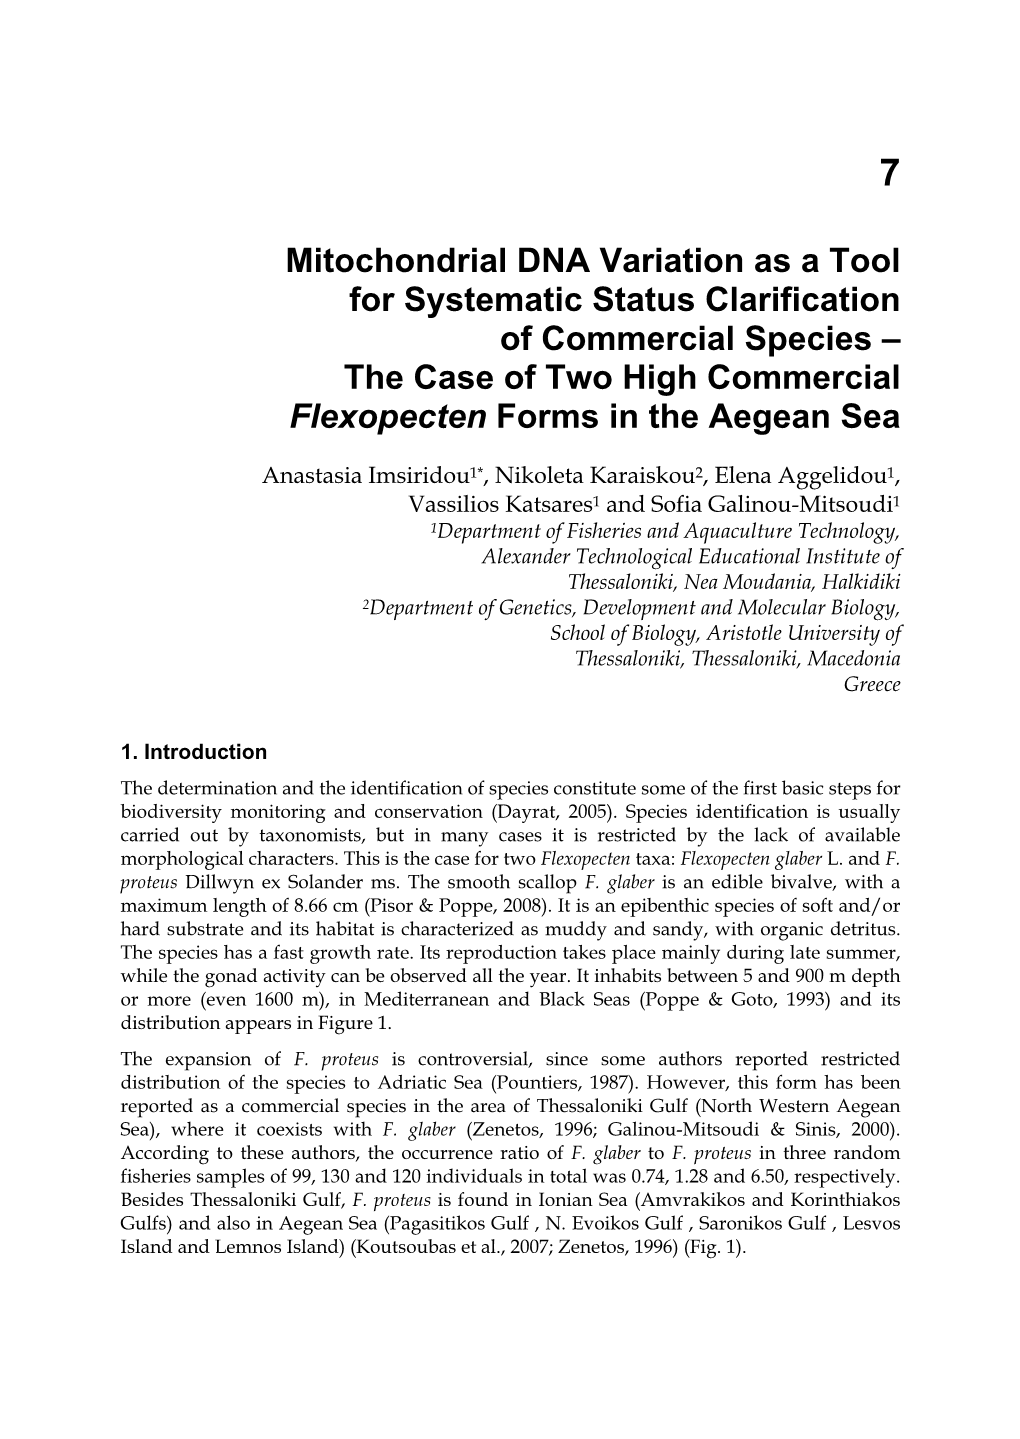 Mitochondrial DNA Variation As a Tool for Systematic Status Clarification of Commercial Species – the Case of Two High Commercial Flexopecten Forms in the Aegean Sea